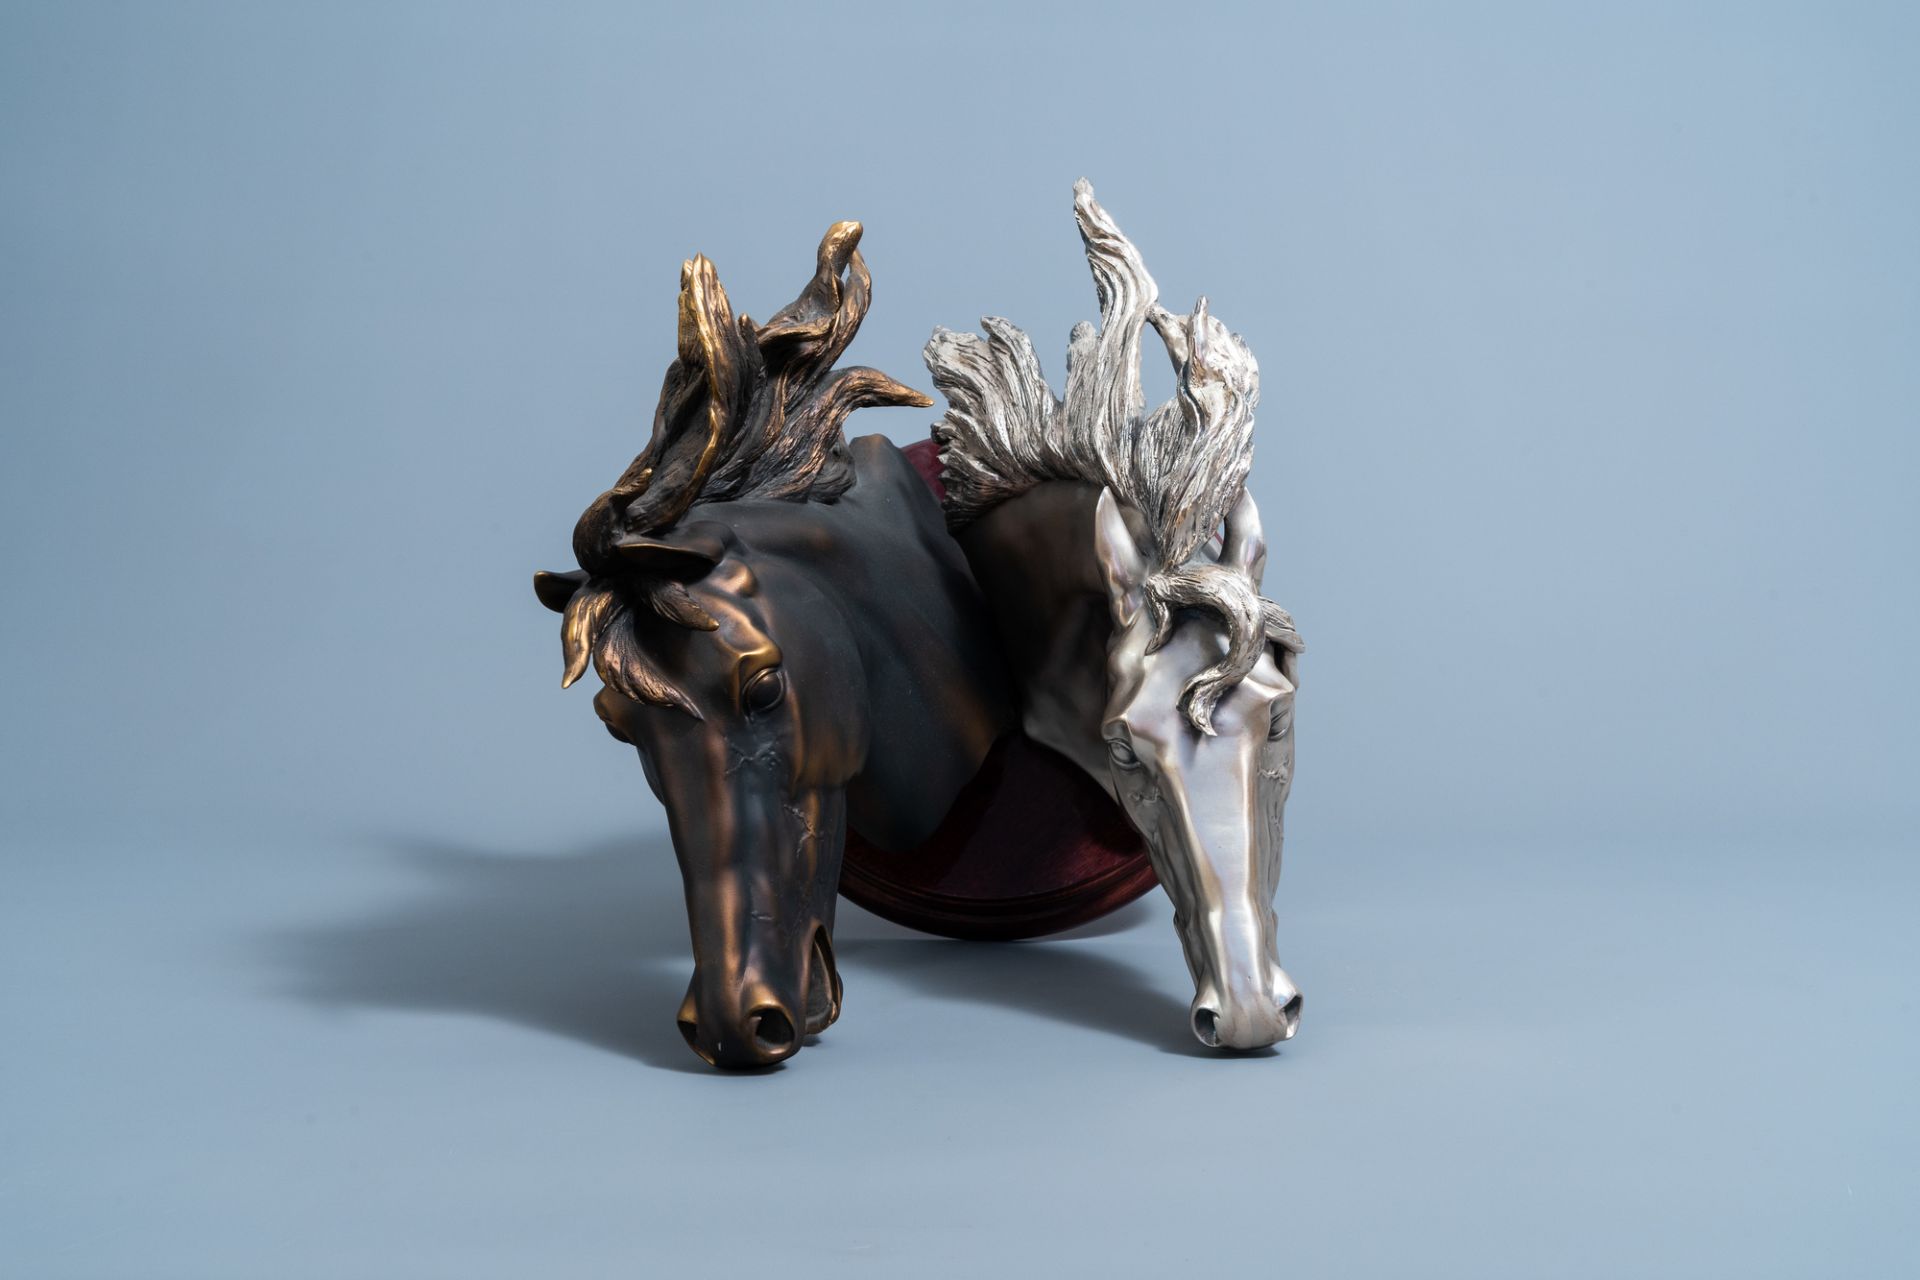 Illegibly signed: A silver plated and a patinated horse's head, Brunel, Italy, dated 1997 - Image 8 of 11